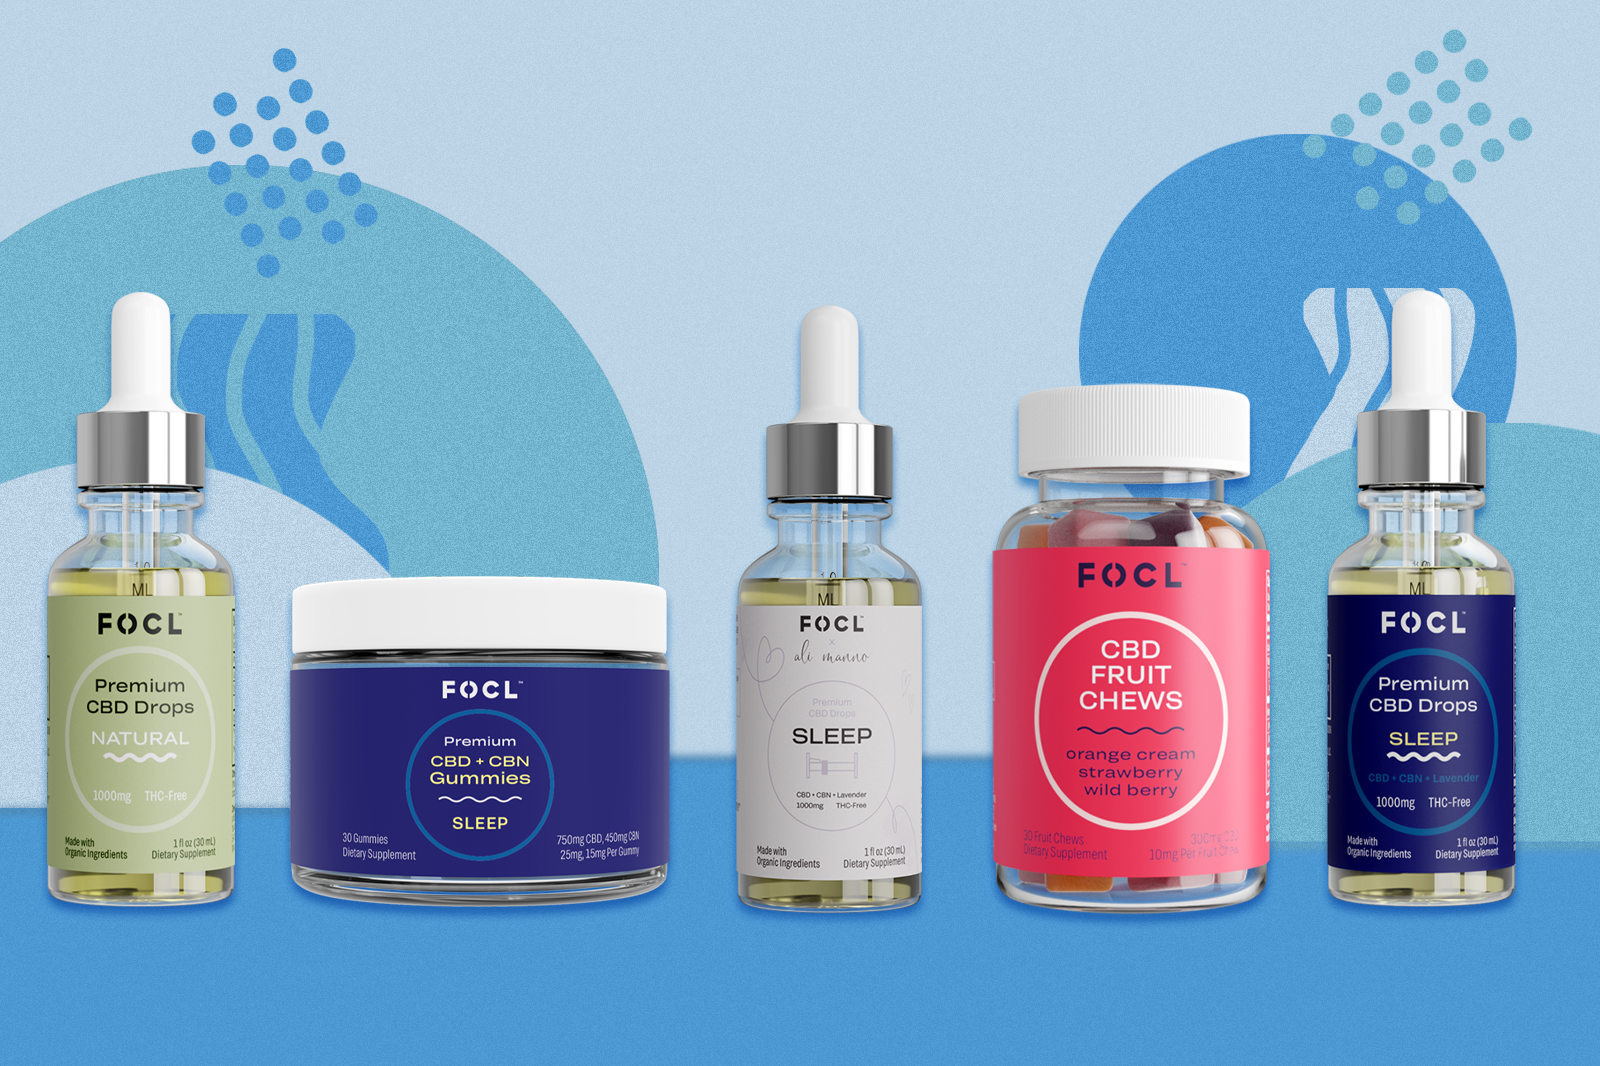 FOCL CBD products lined up on a blue pattern background.